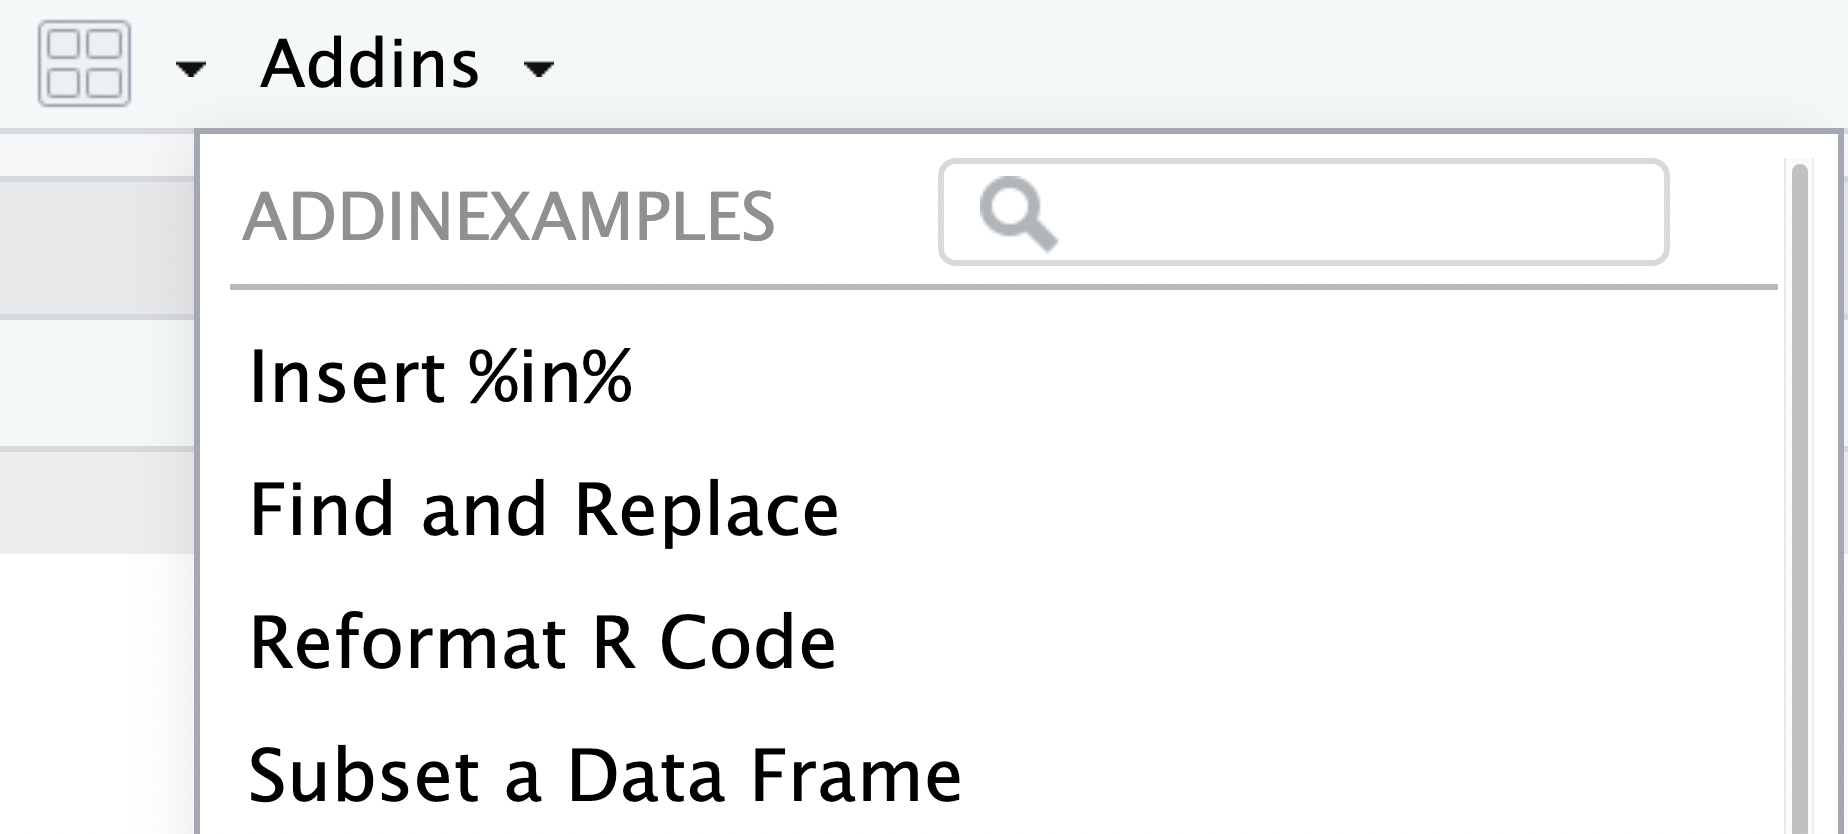 A screenshot of the addinexamples dropdown - displaying the insert, find and replace, reformat R code, and Subset a data frame add-ins.